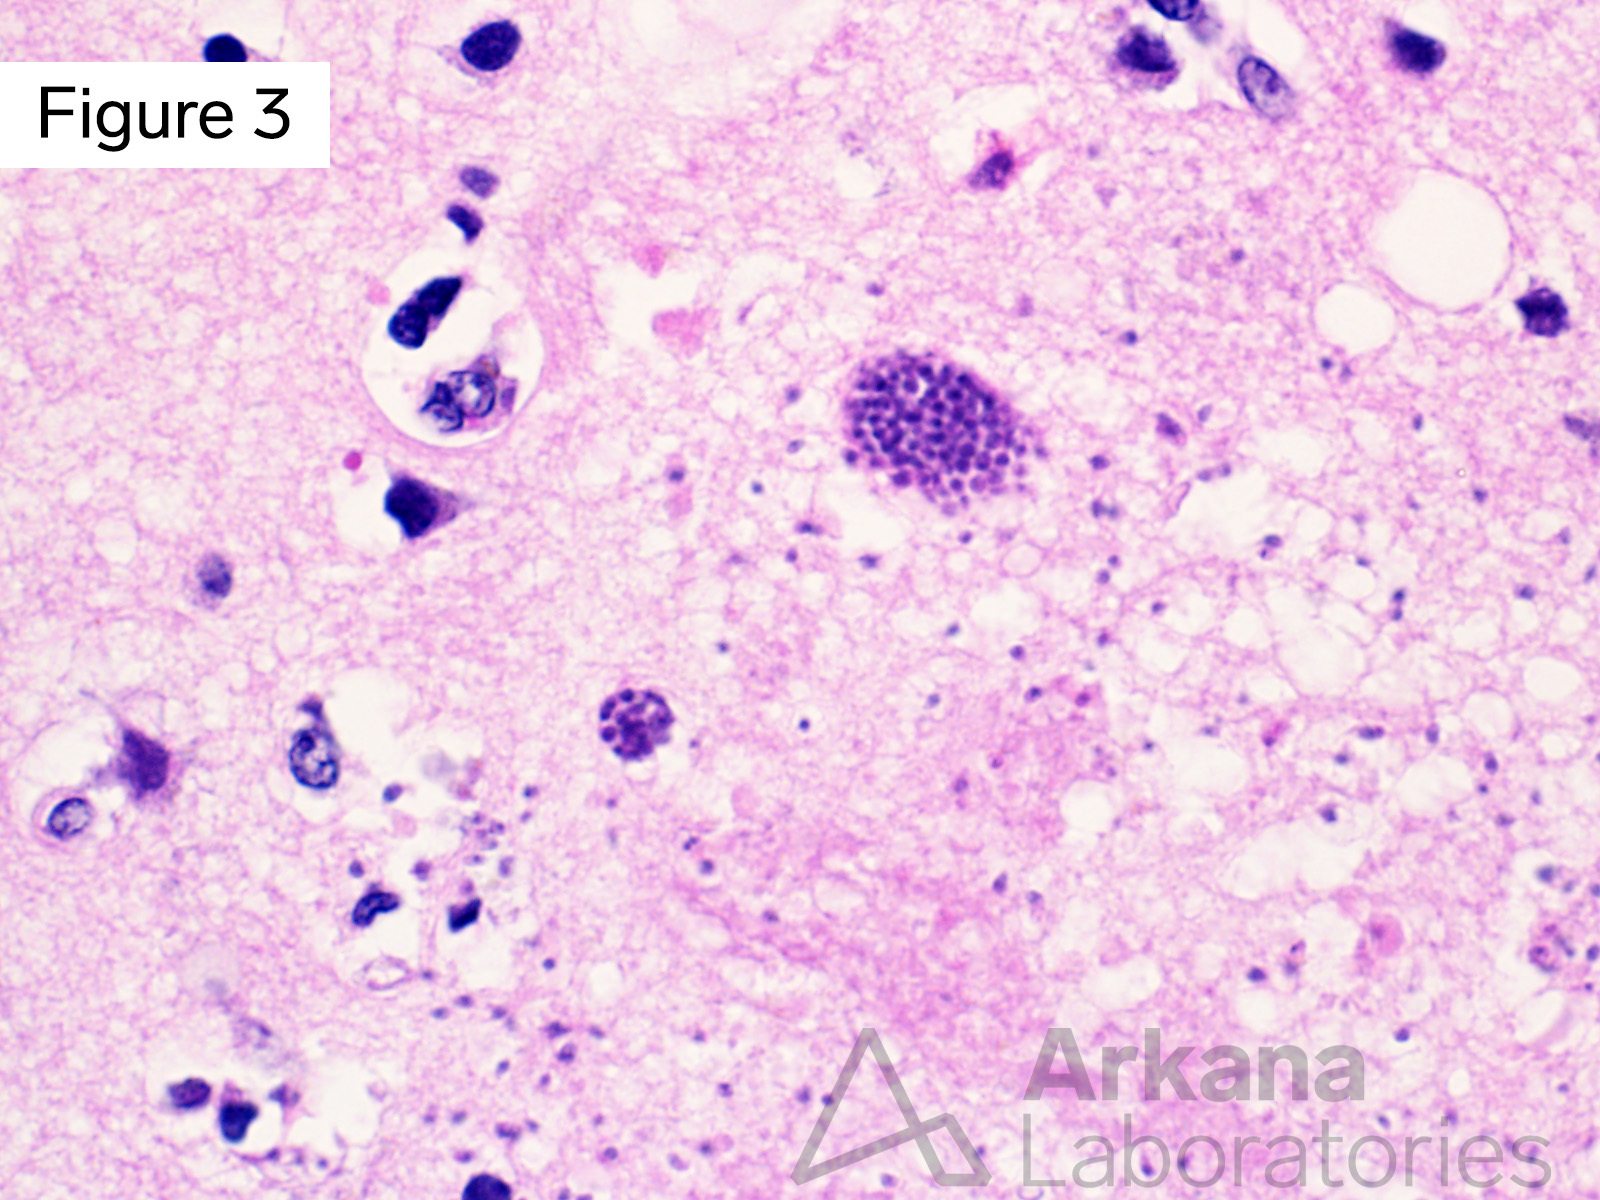 h&E stain showing Toxoplasmosis